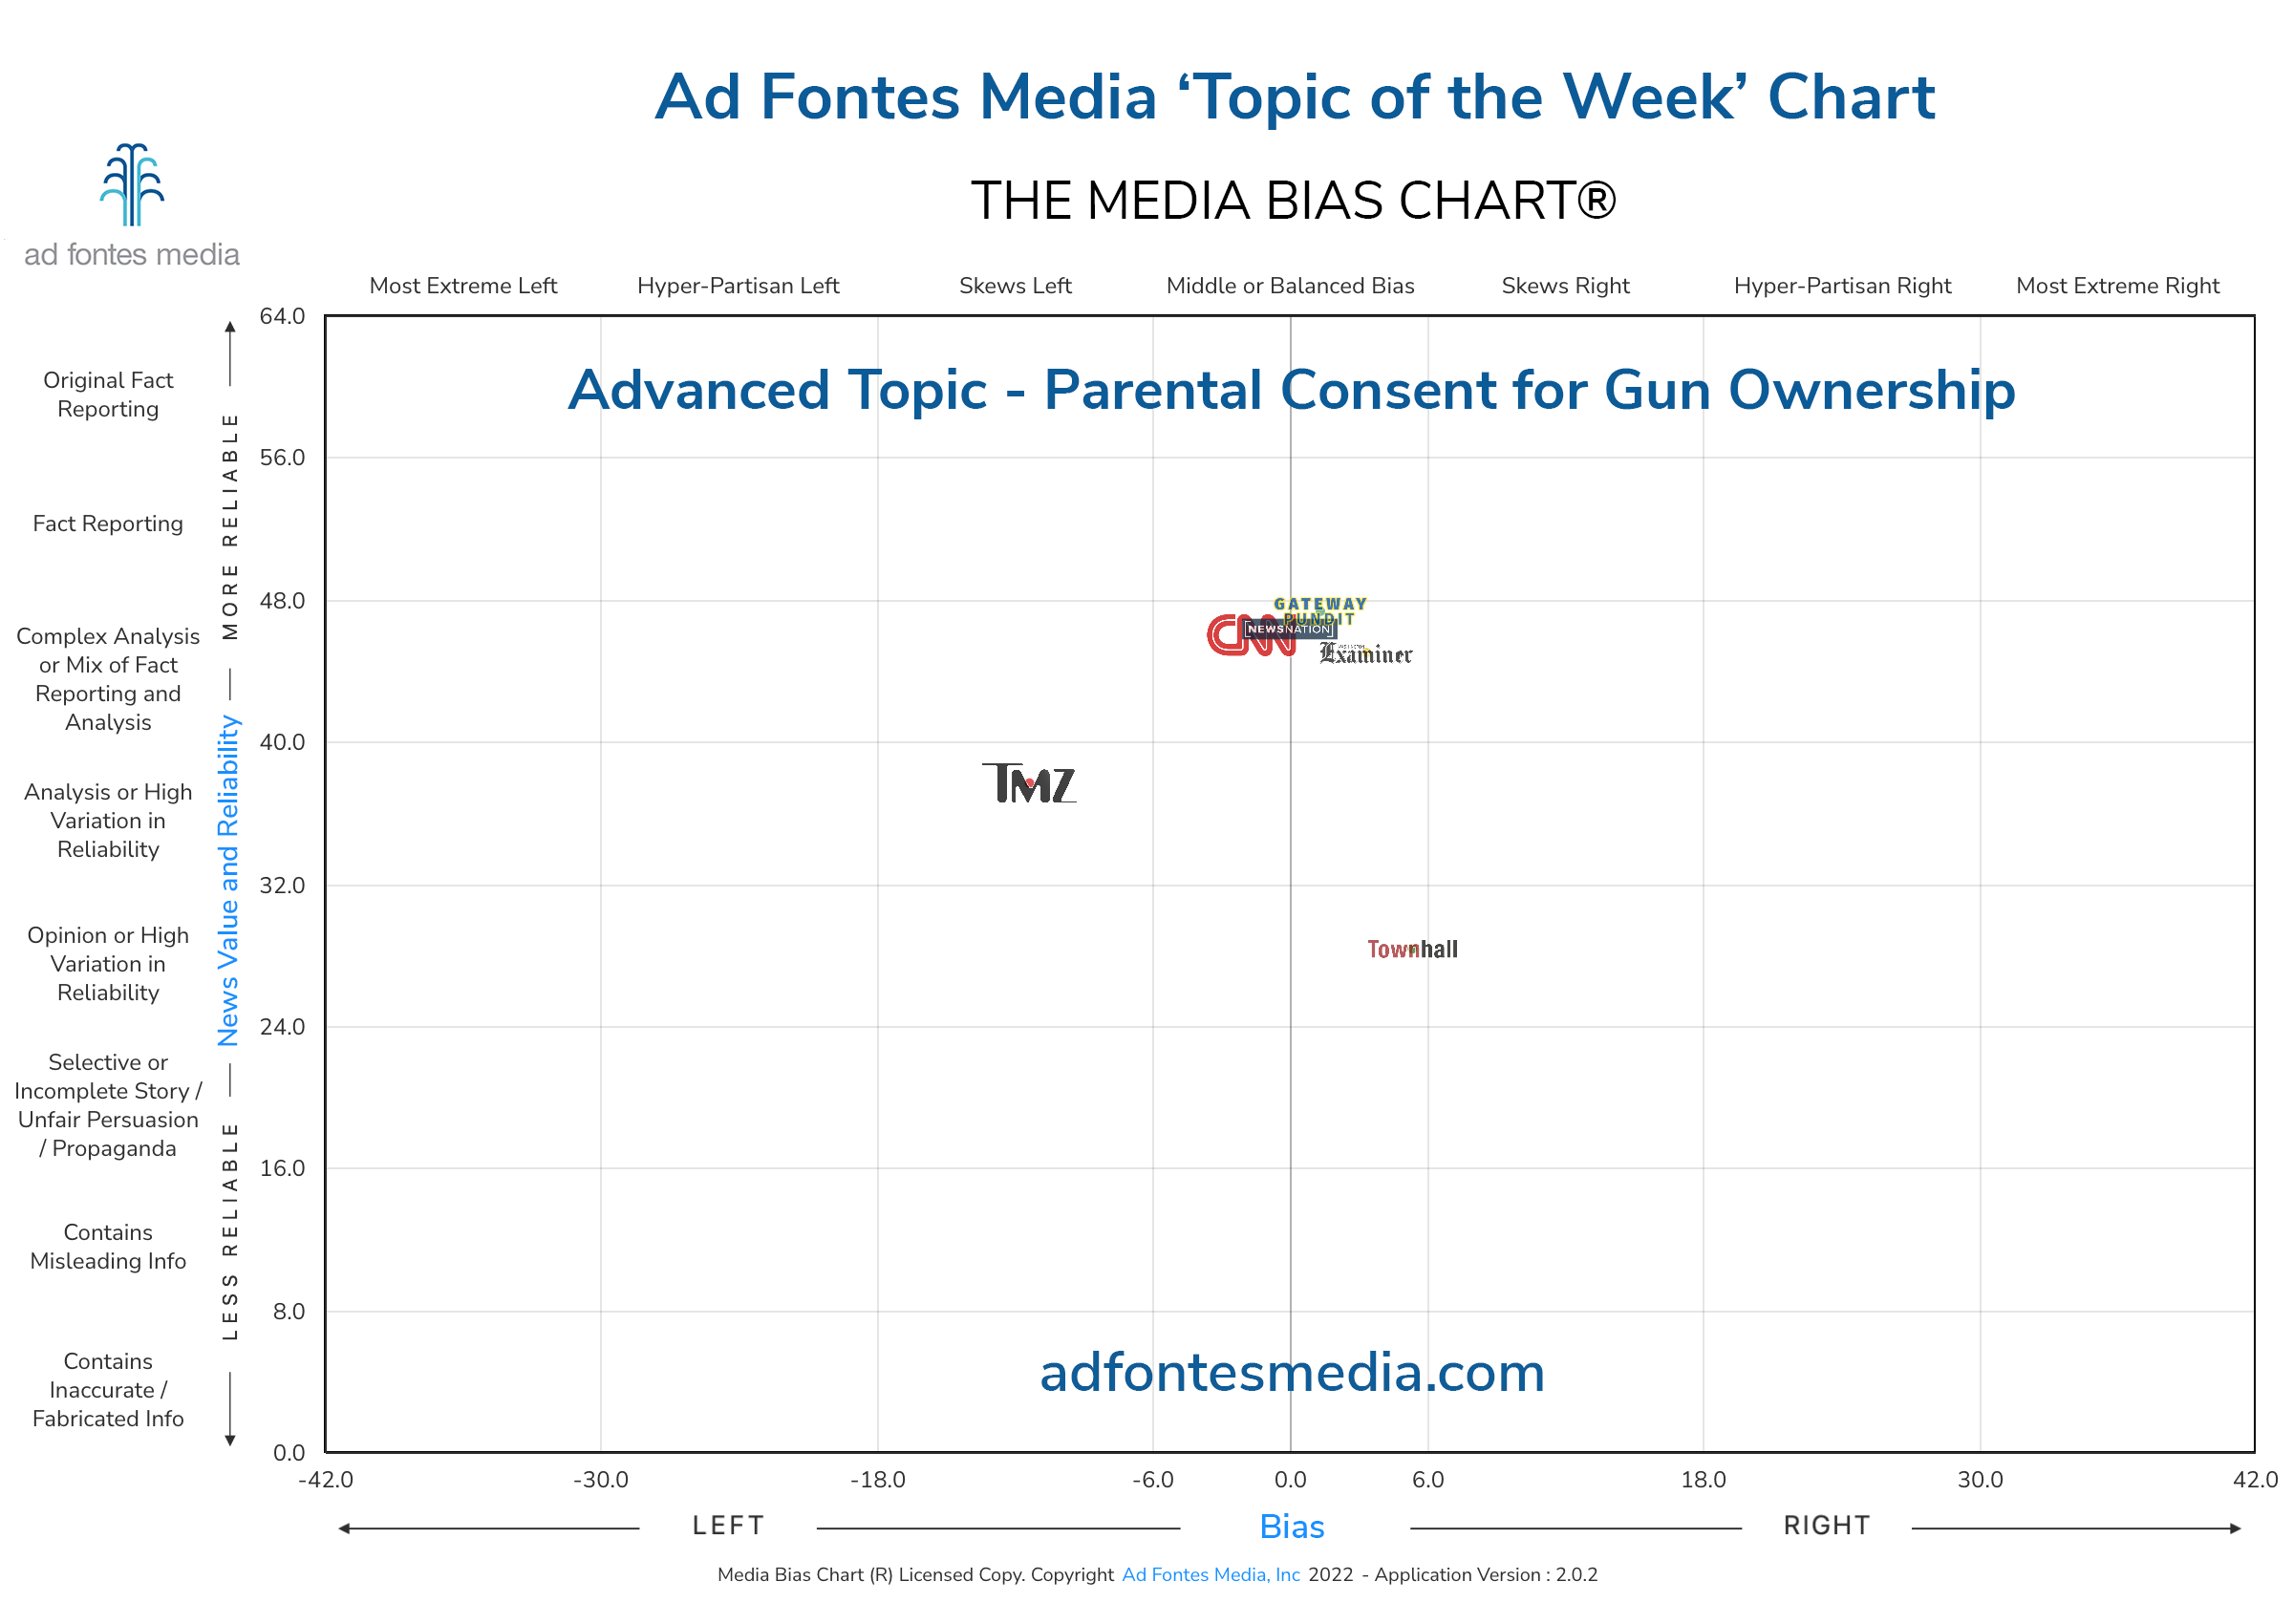 Scores of the Parental Consent for Gun Ownership articles on the chart